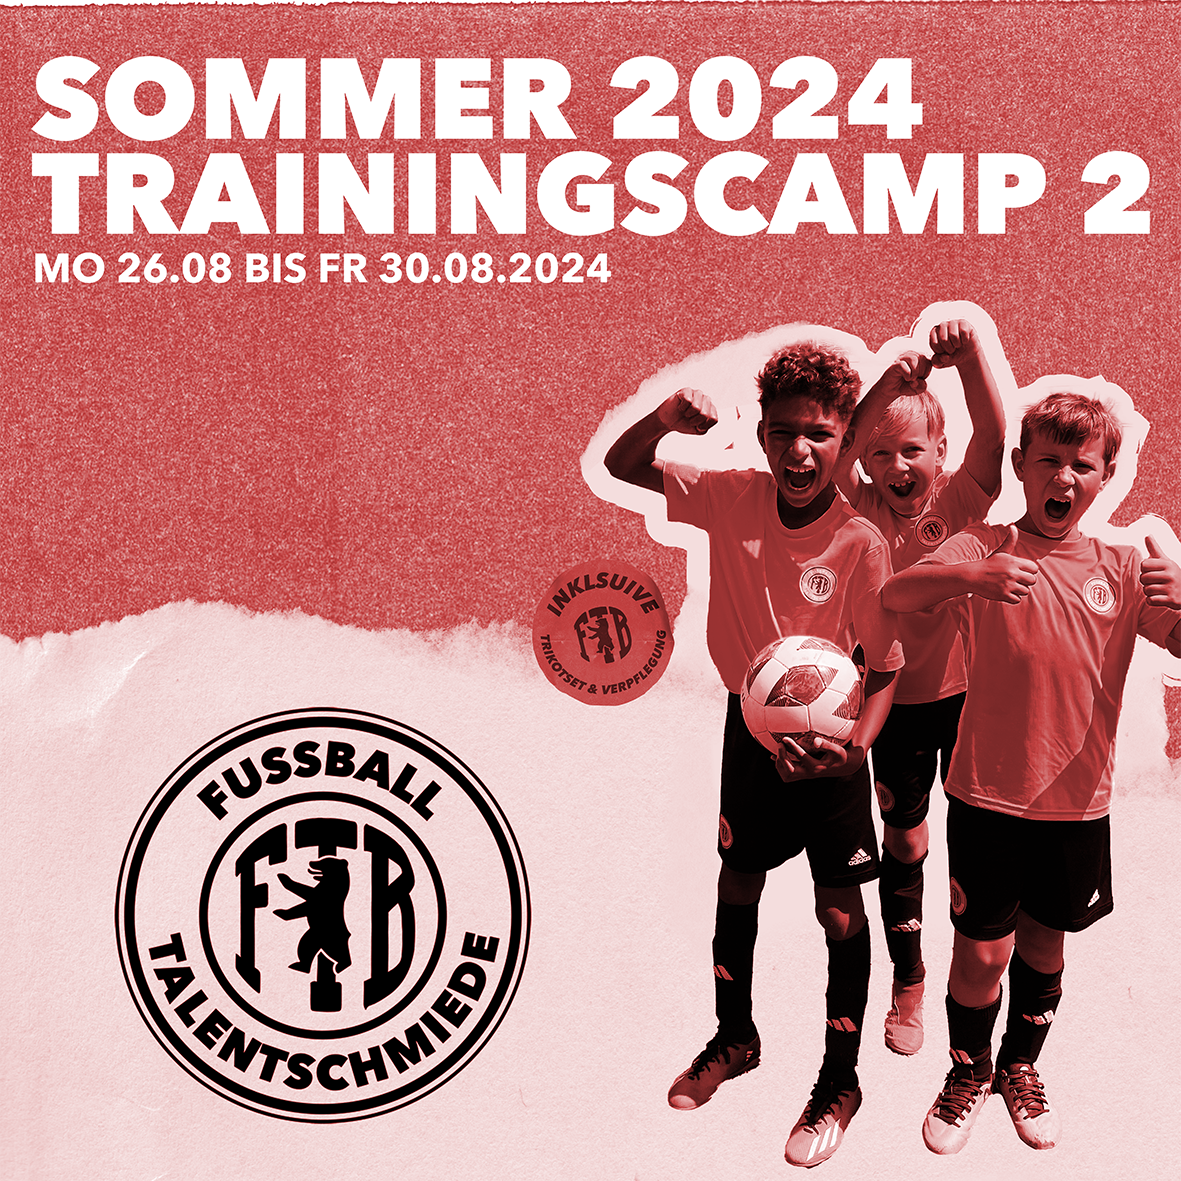 Sommer 2 Trainingscamps August 2024 ( 6-12 Jahre)